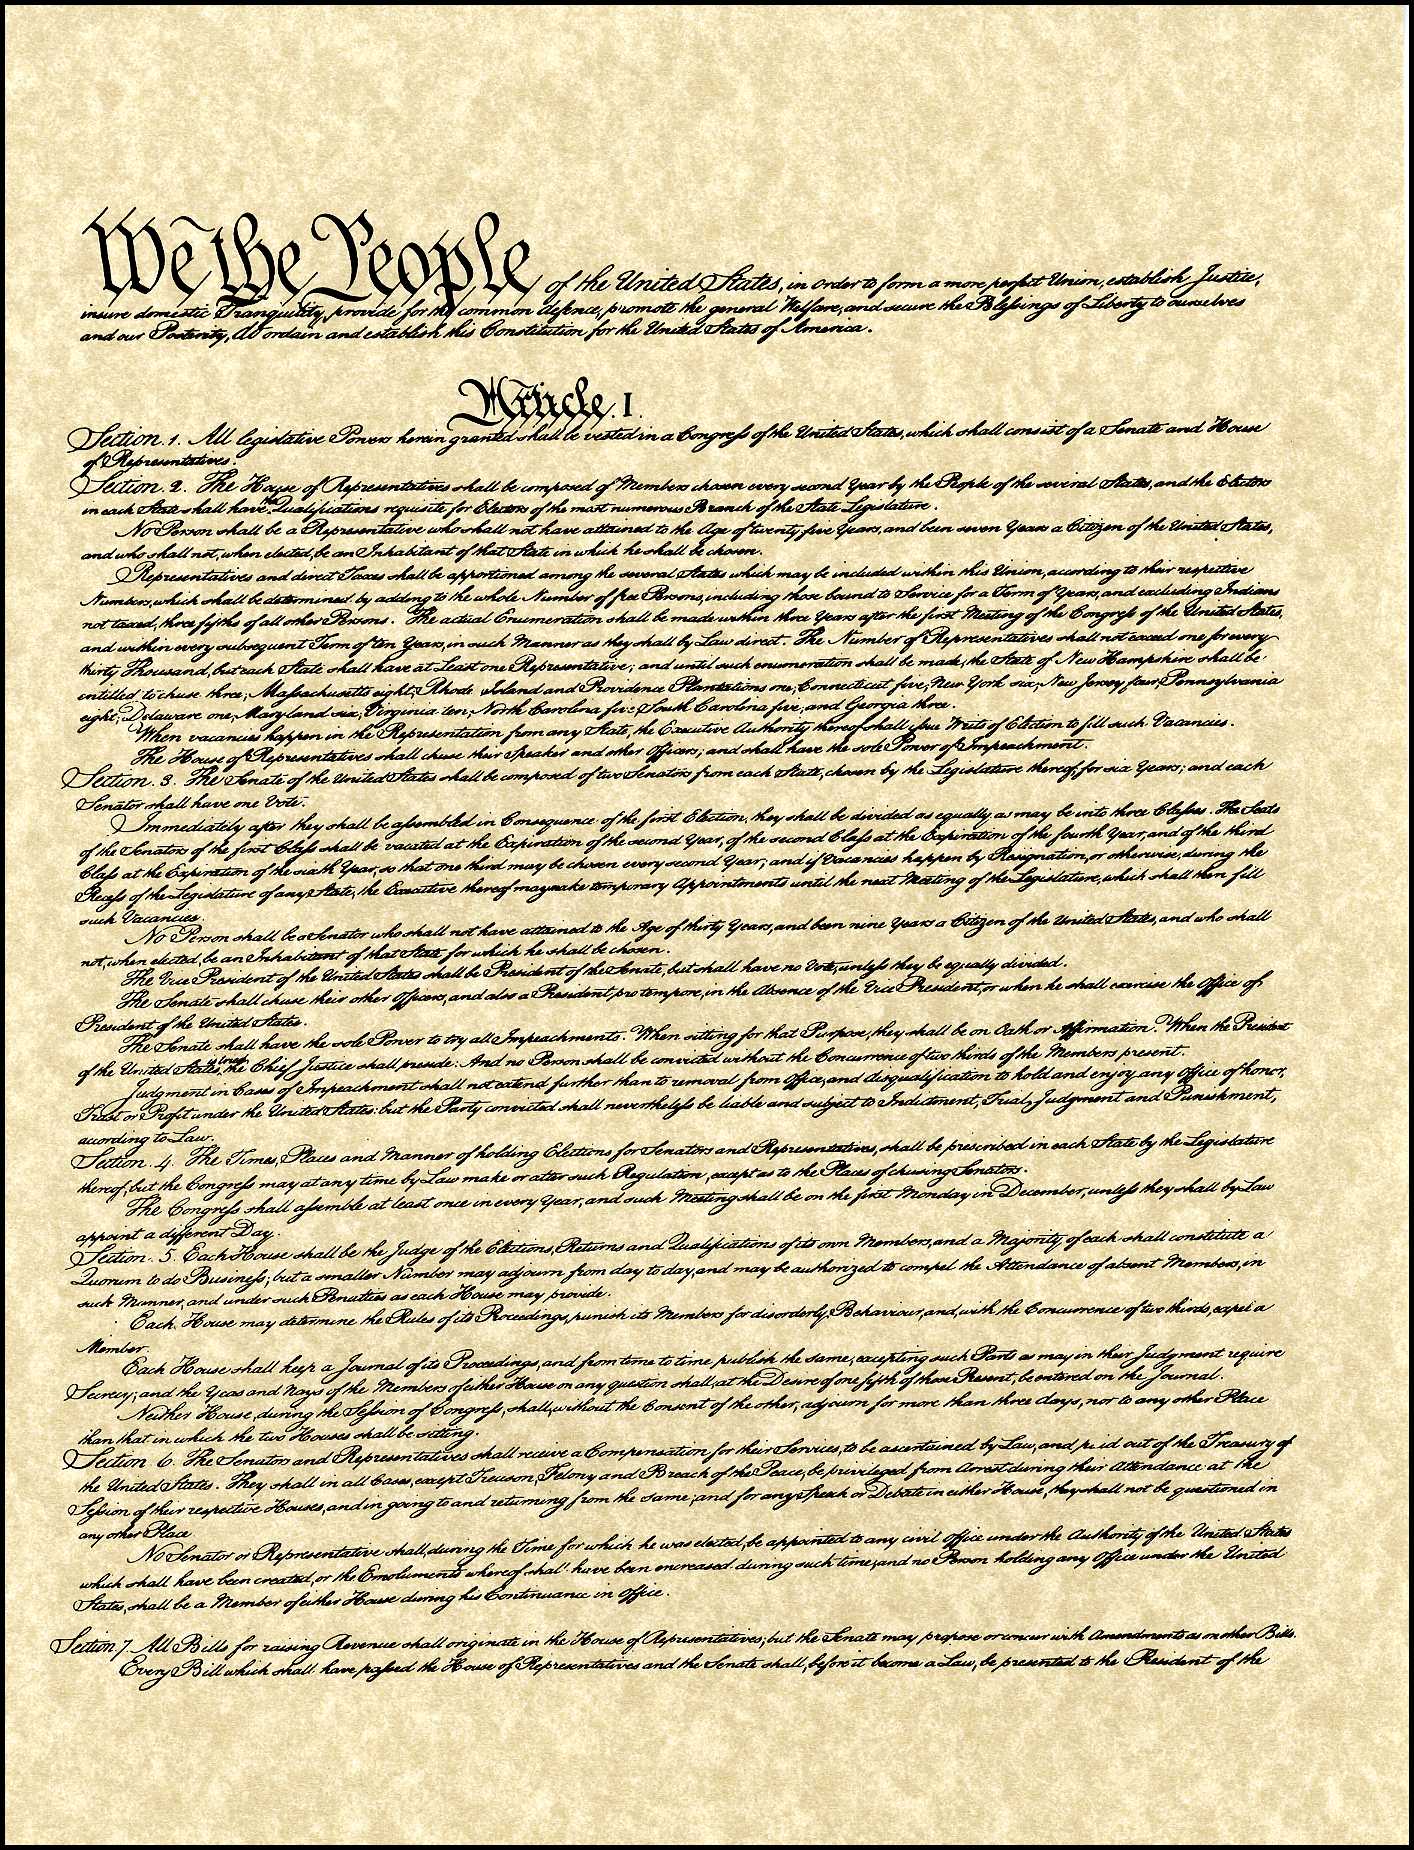 1414x1850px 577.63 KB The Constitution